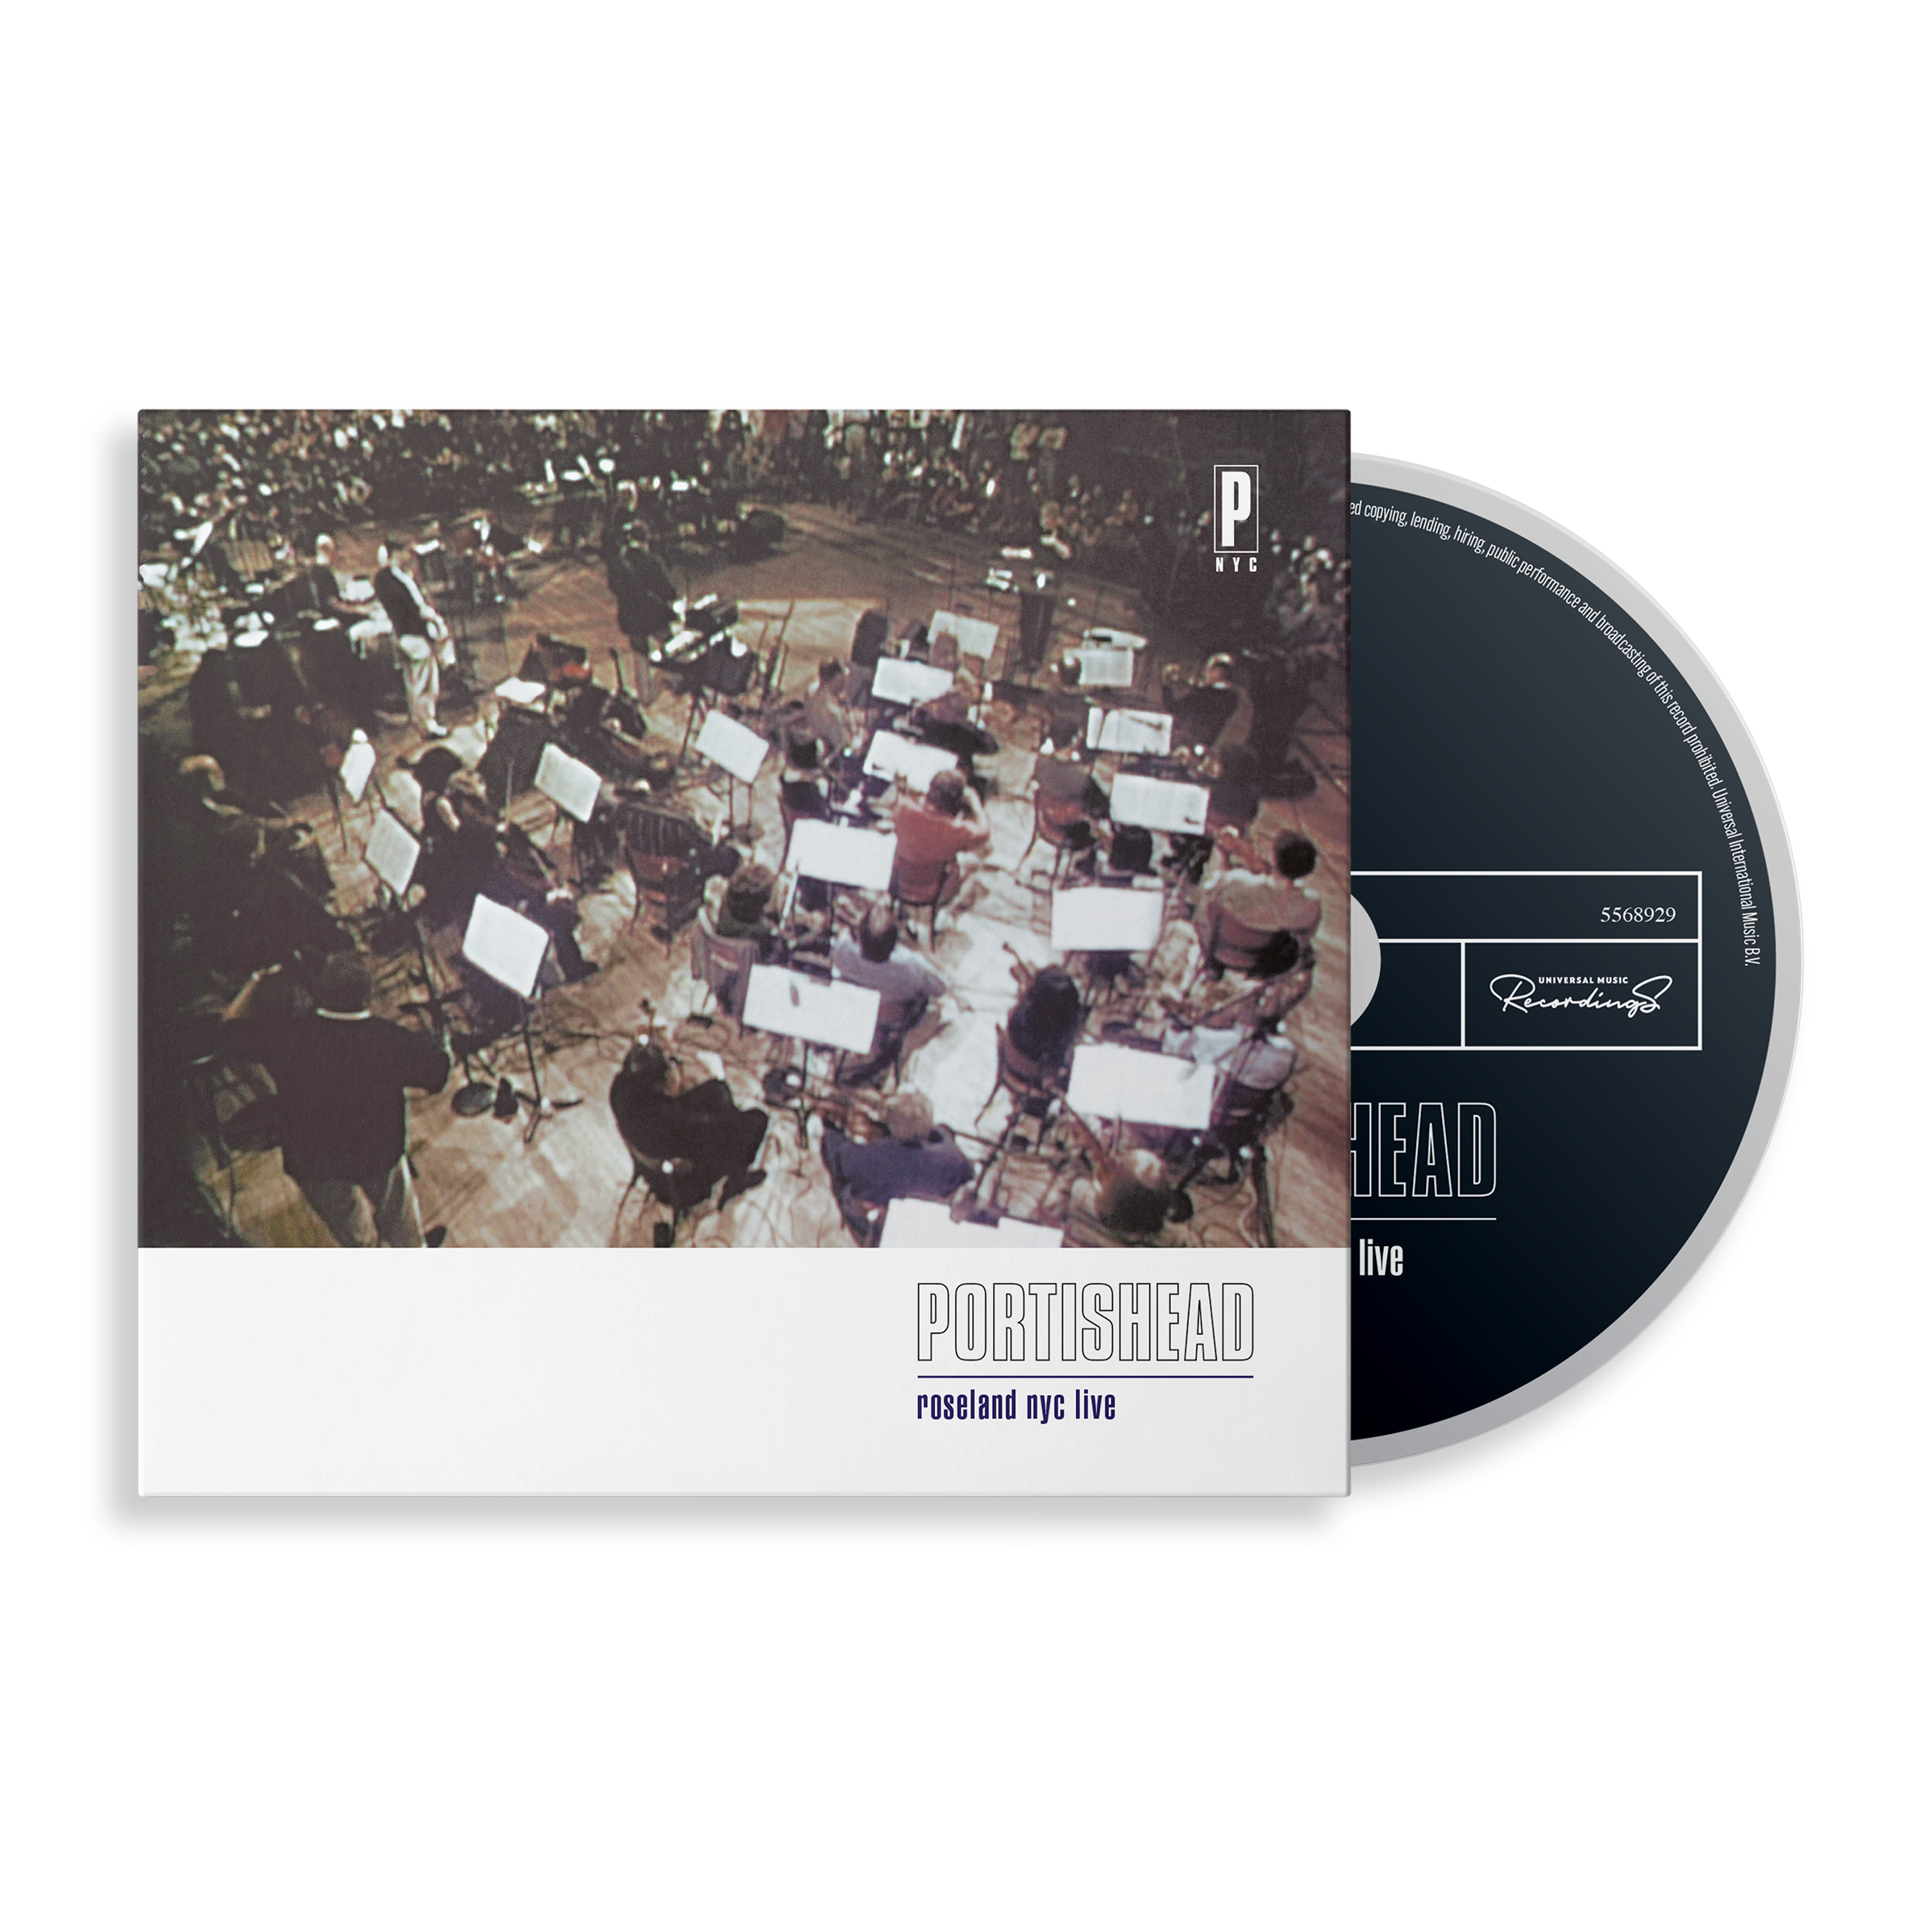 Portishead - Roseland NYC Live (25th Anniversary Edition): Limited Edition CD